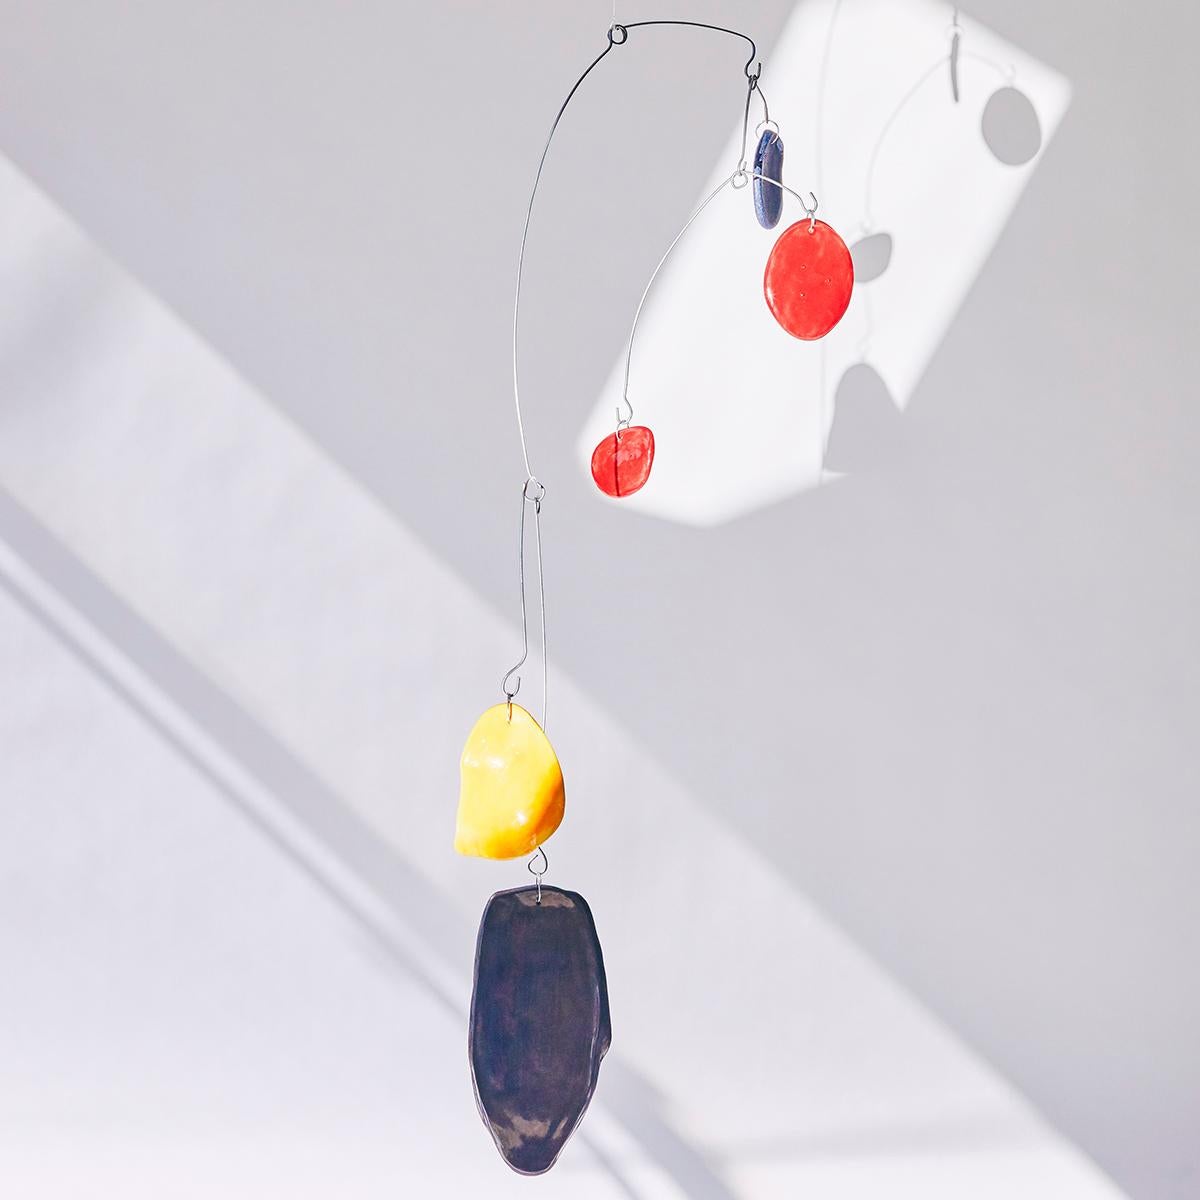 Alejandra Jaimes is a young Colombian artist based in Barcelona, focused on installation and experimentation with new materials. Inspired by great artists such as Alexander Calder, Alejandra explores her surrounding reality, through form and pure